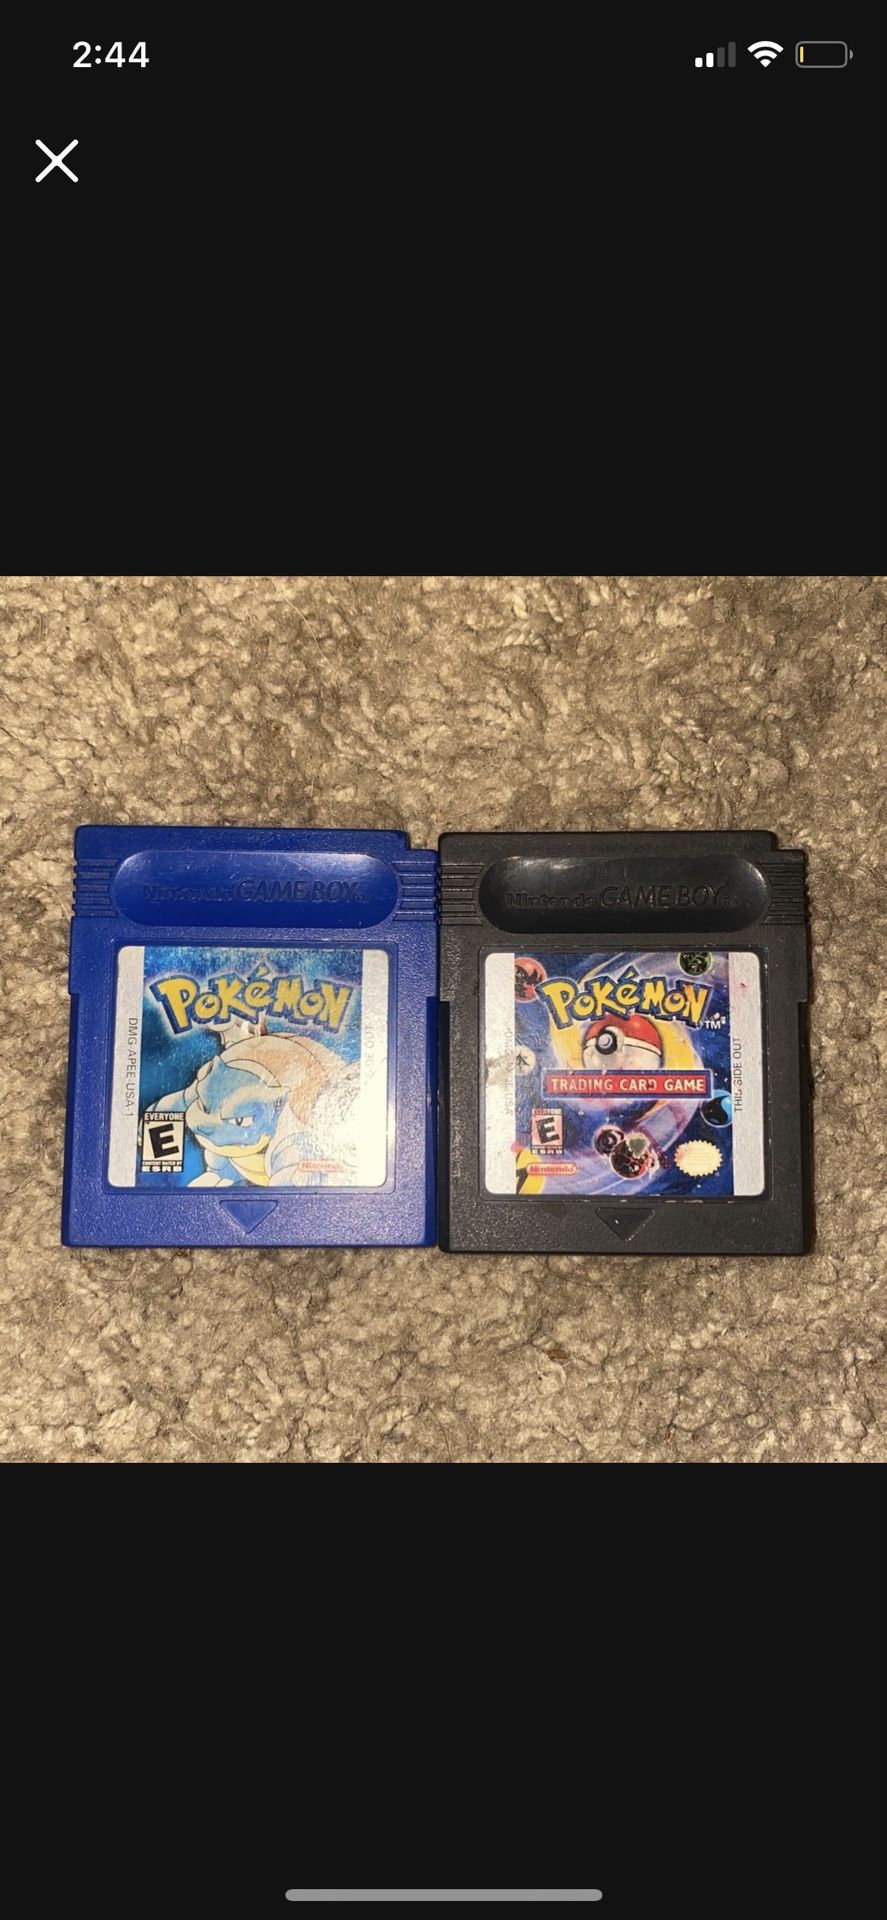 Pokémon Blue Version Worth $50 Used And Pokemon Trading Card Game Worth $45 Used Included 